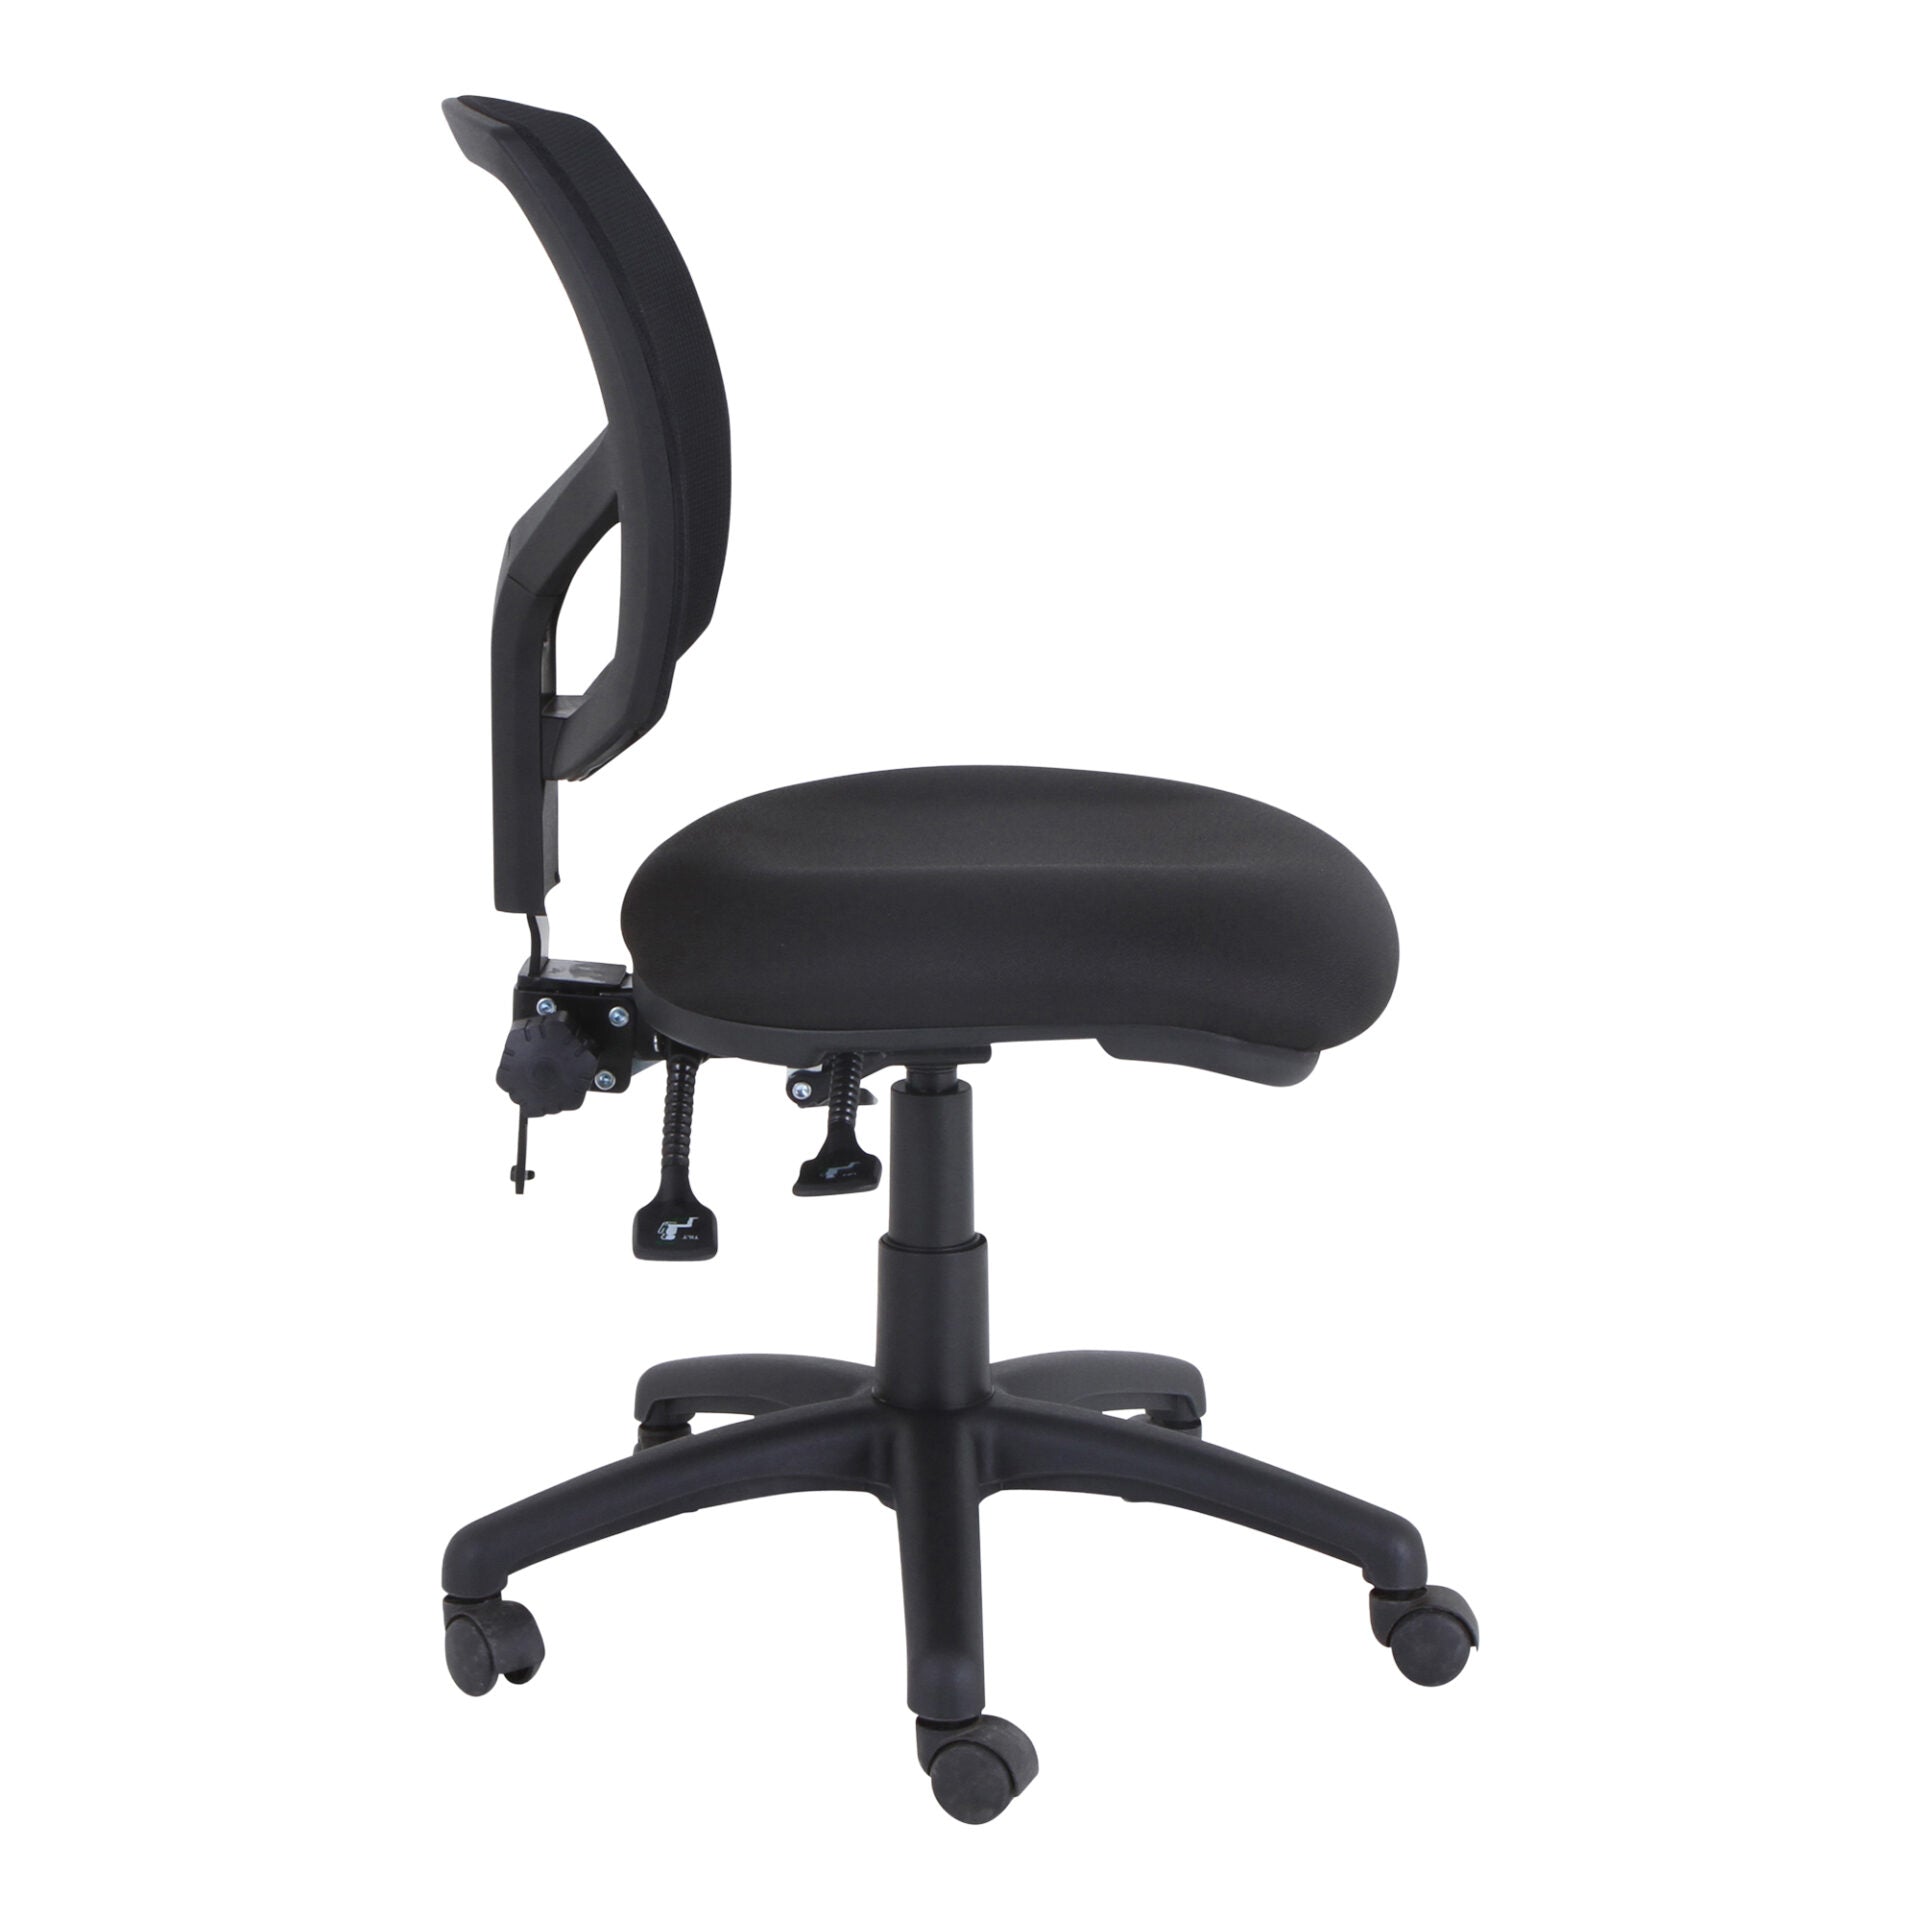 Mondo Java mesh-back office chair in black, side view.